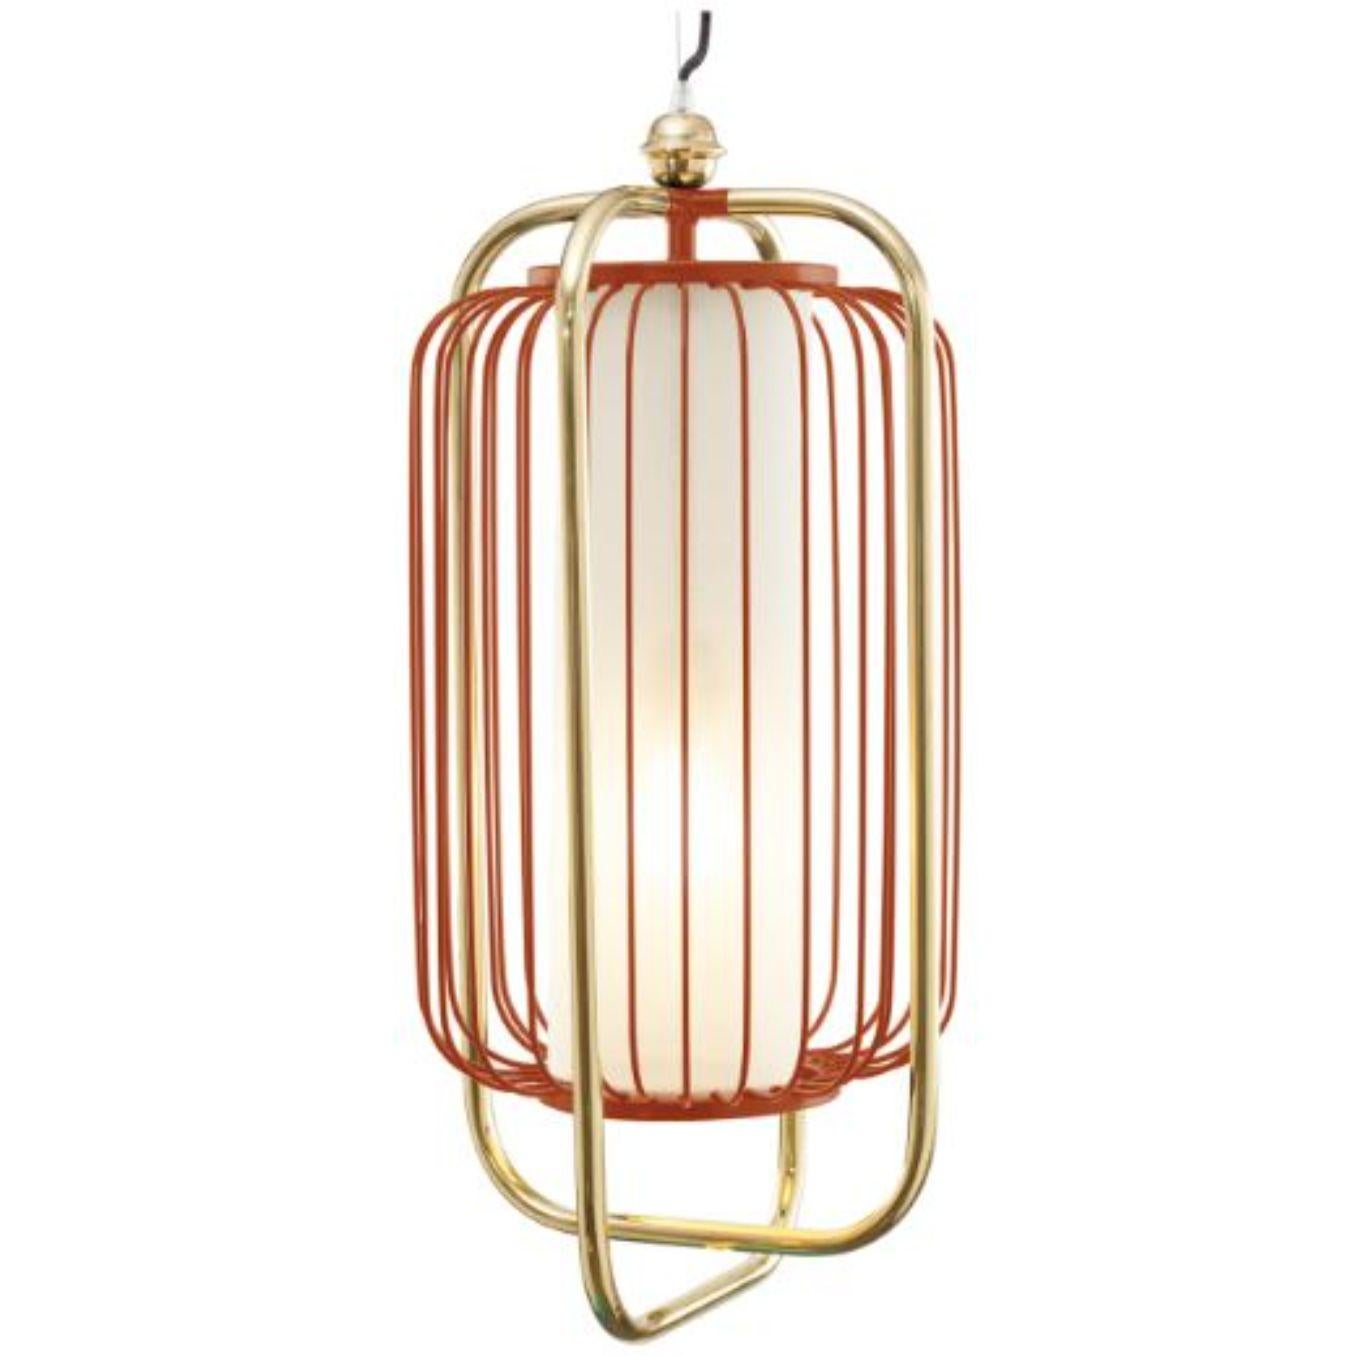 Copper and Salmon Jules II Suspension lamp by Dooq
Dimensions: W 30 x D 30 x H 64 cm
Materials: lacquered metal, polished or brushed metal, copper.
abat-jour: cotton
Also available in different colors and materials.